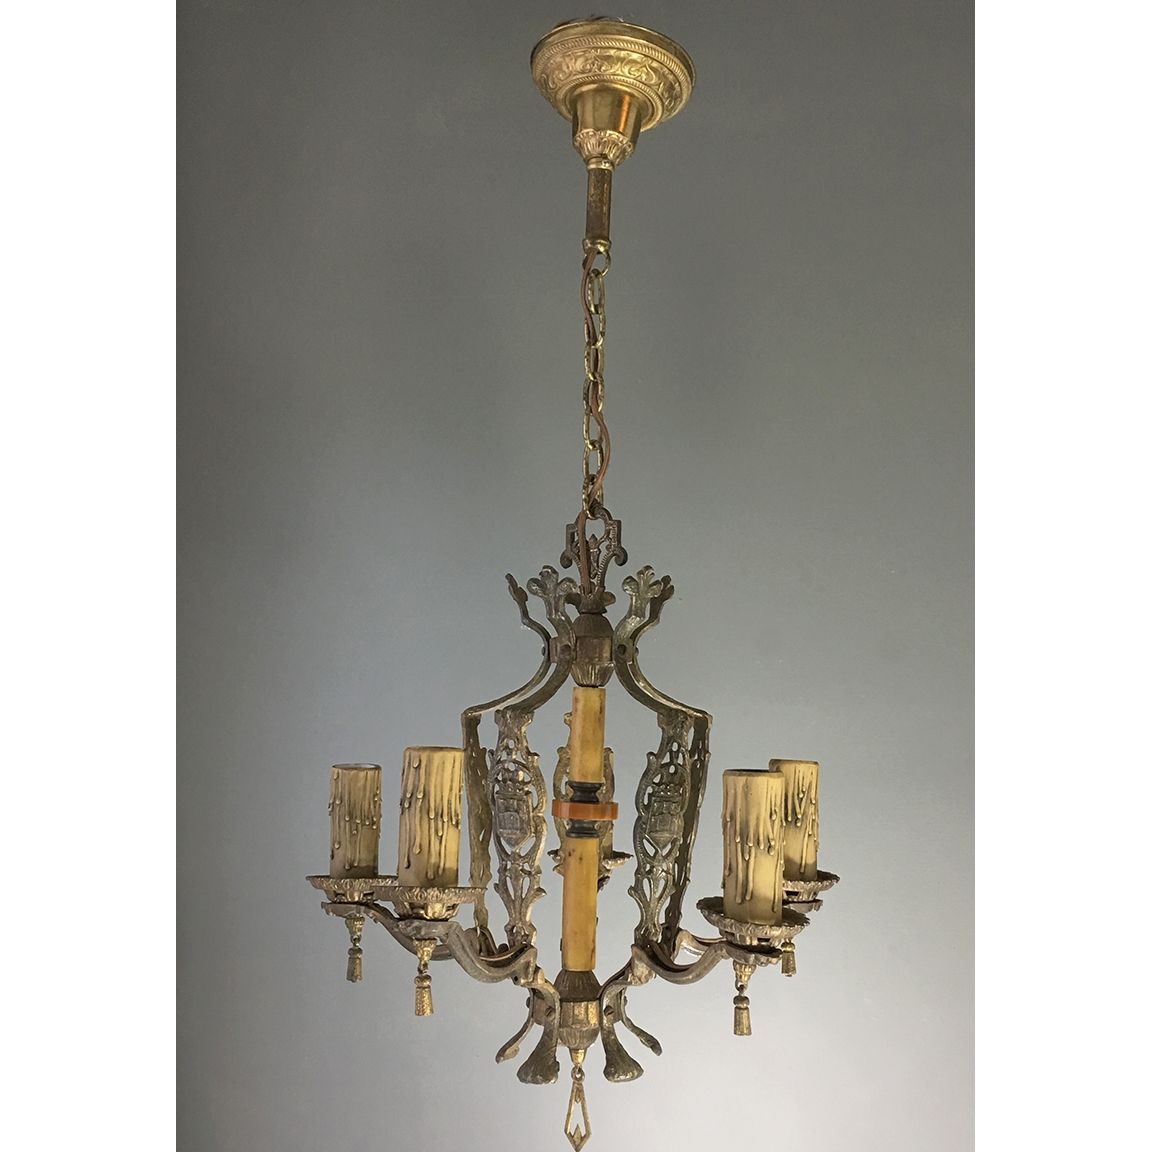 Antique Ceiling Fixtures With Regard To Cast Iron Antique Chandelier (View 12 of 12)